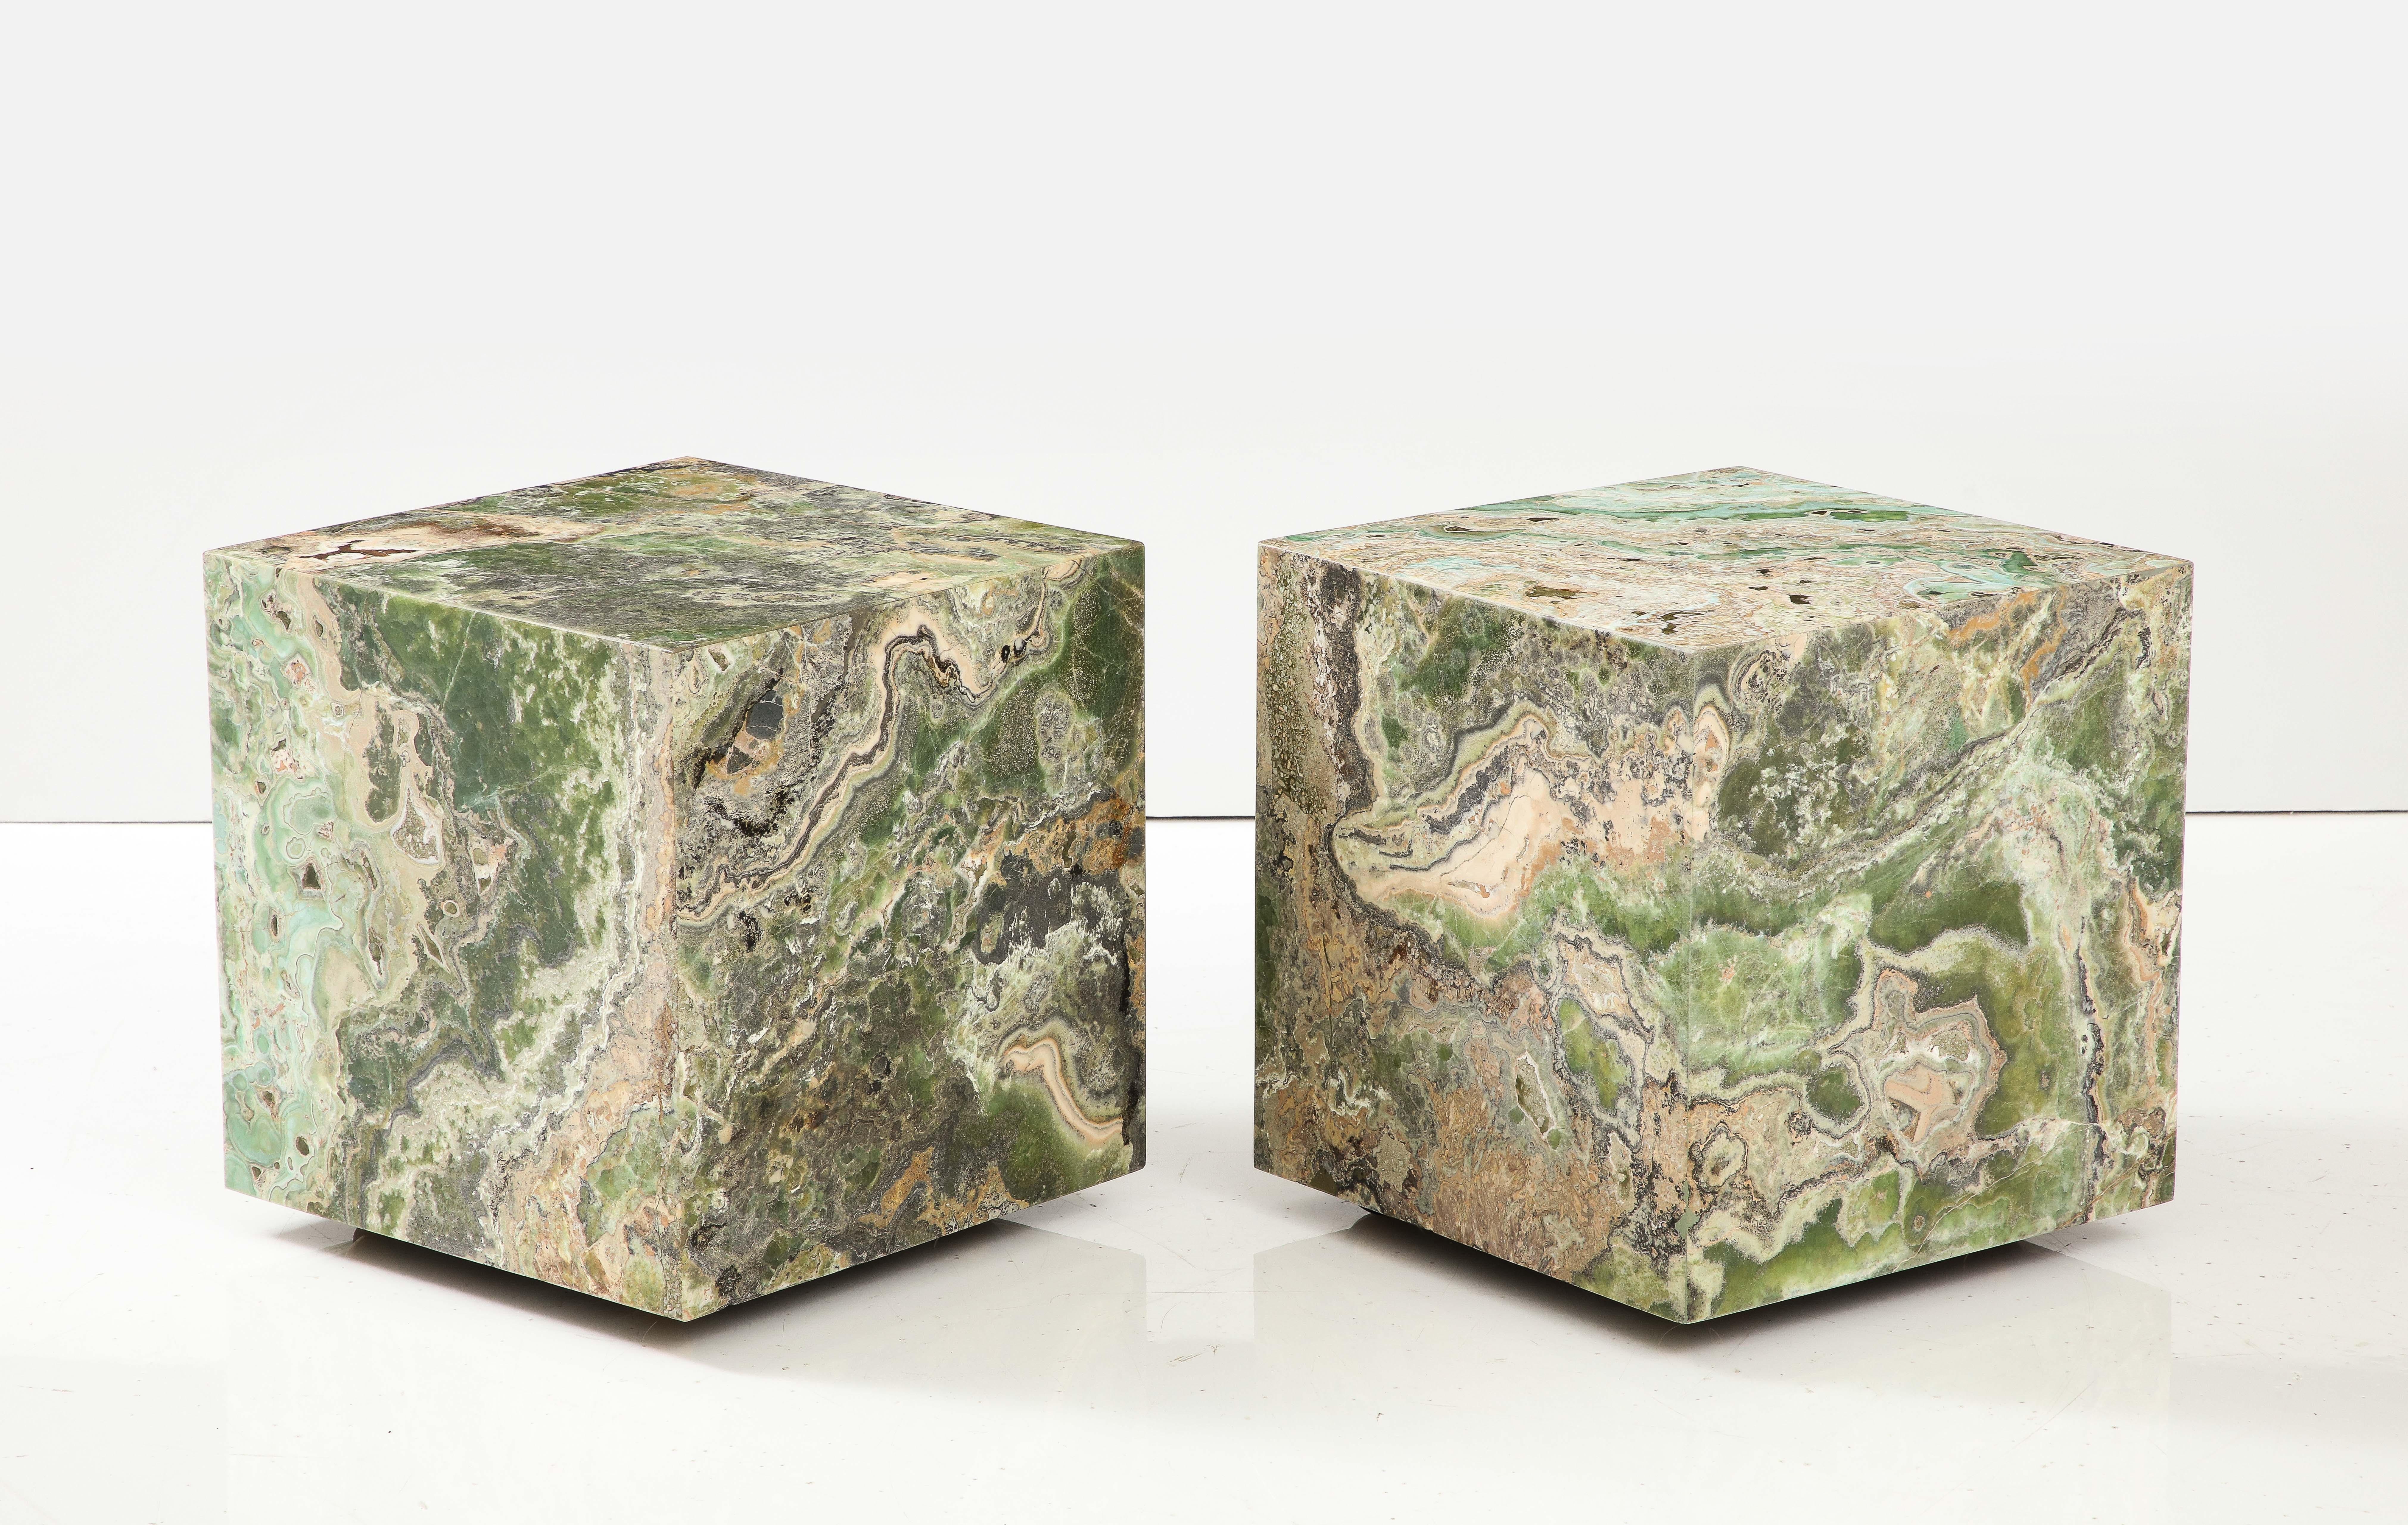 Spectacular pair of custom onyx cubes with a honed finish.
The matte finish of the cubes / side tables give them a wonderful natural look.
They are on brass casters which enables the to be moved easily and placed together if desired to make a